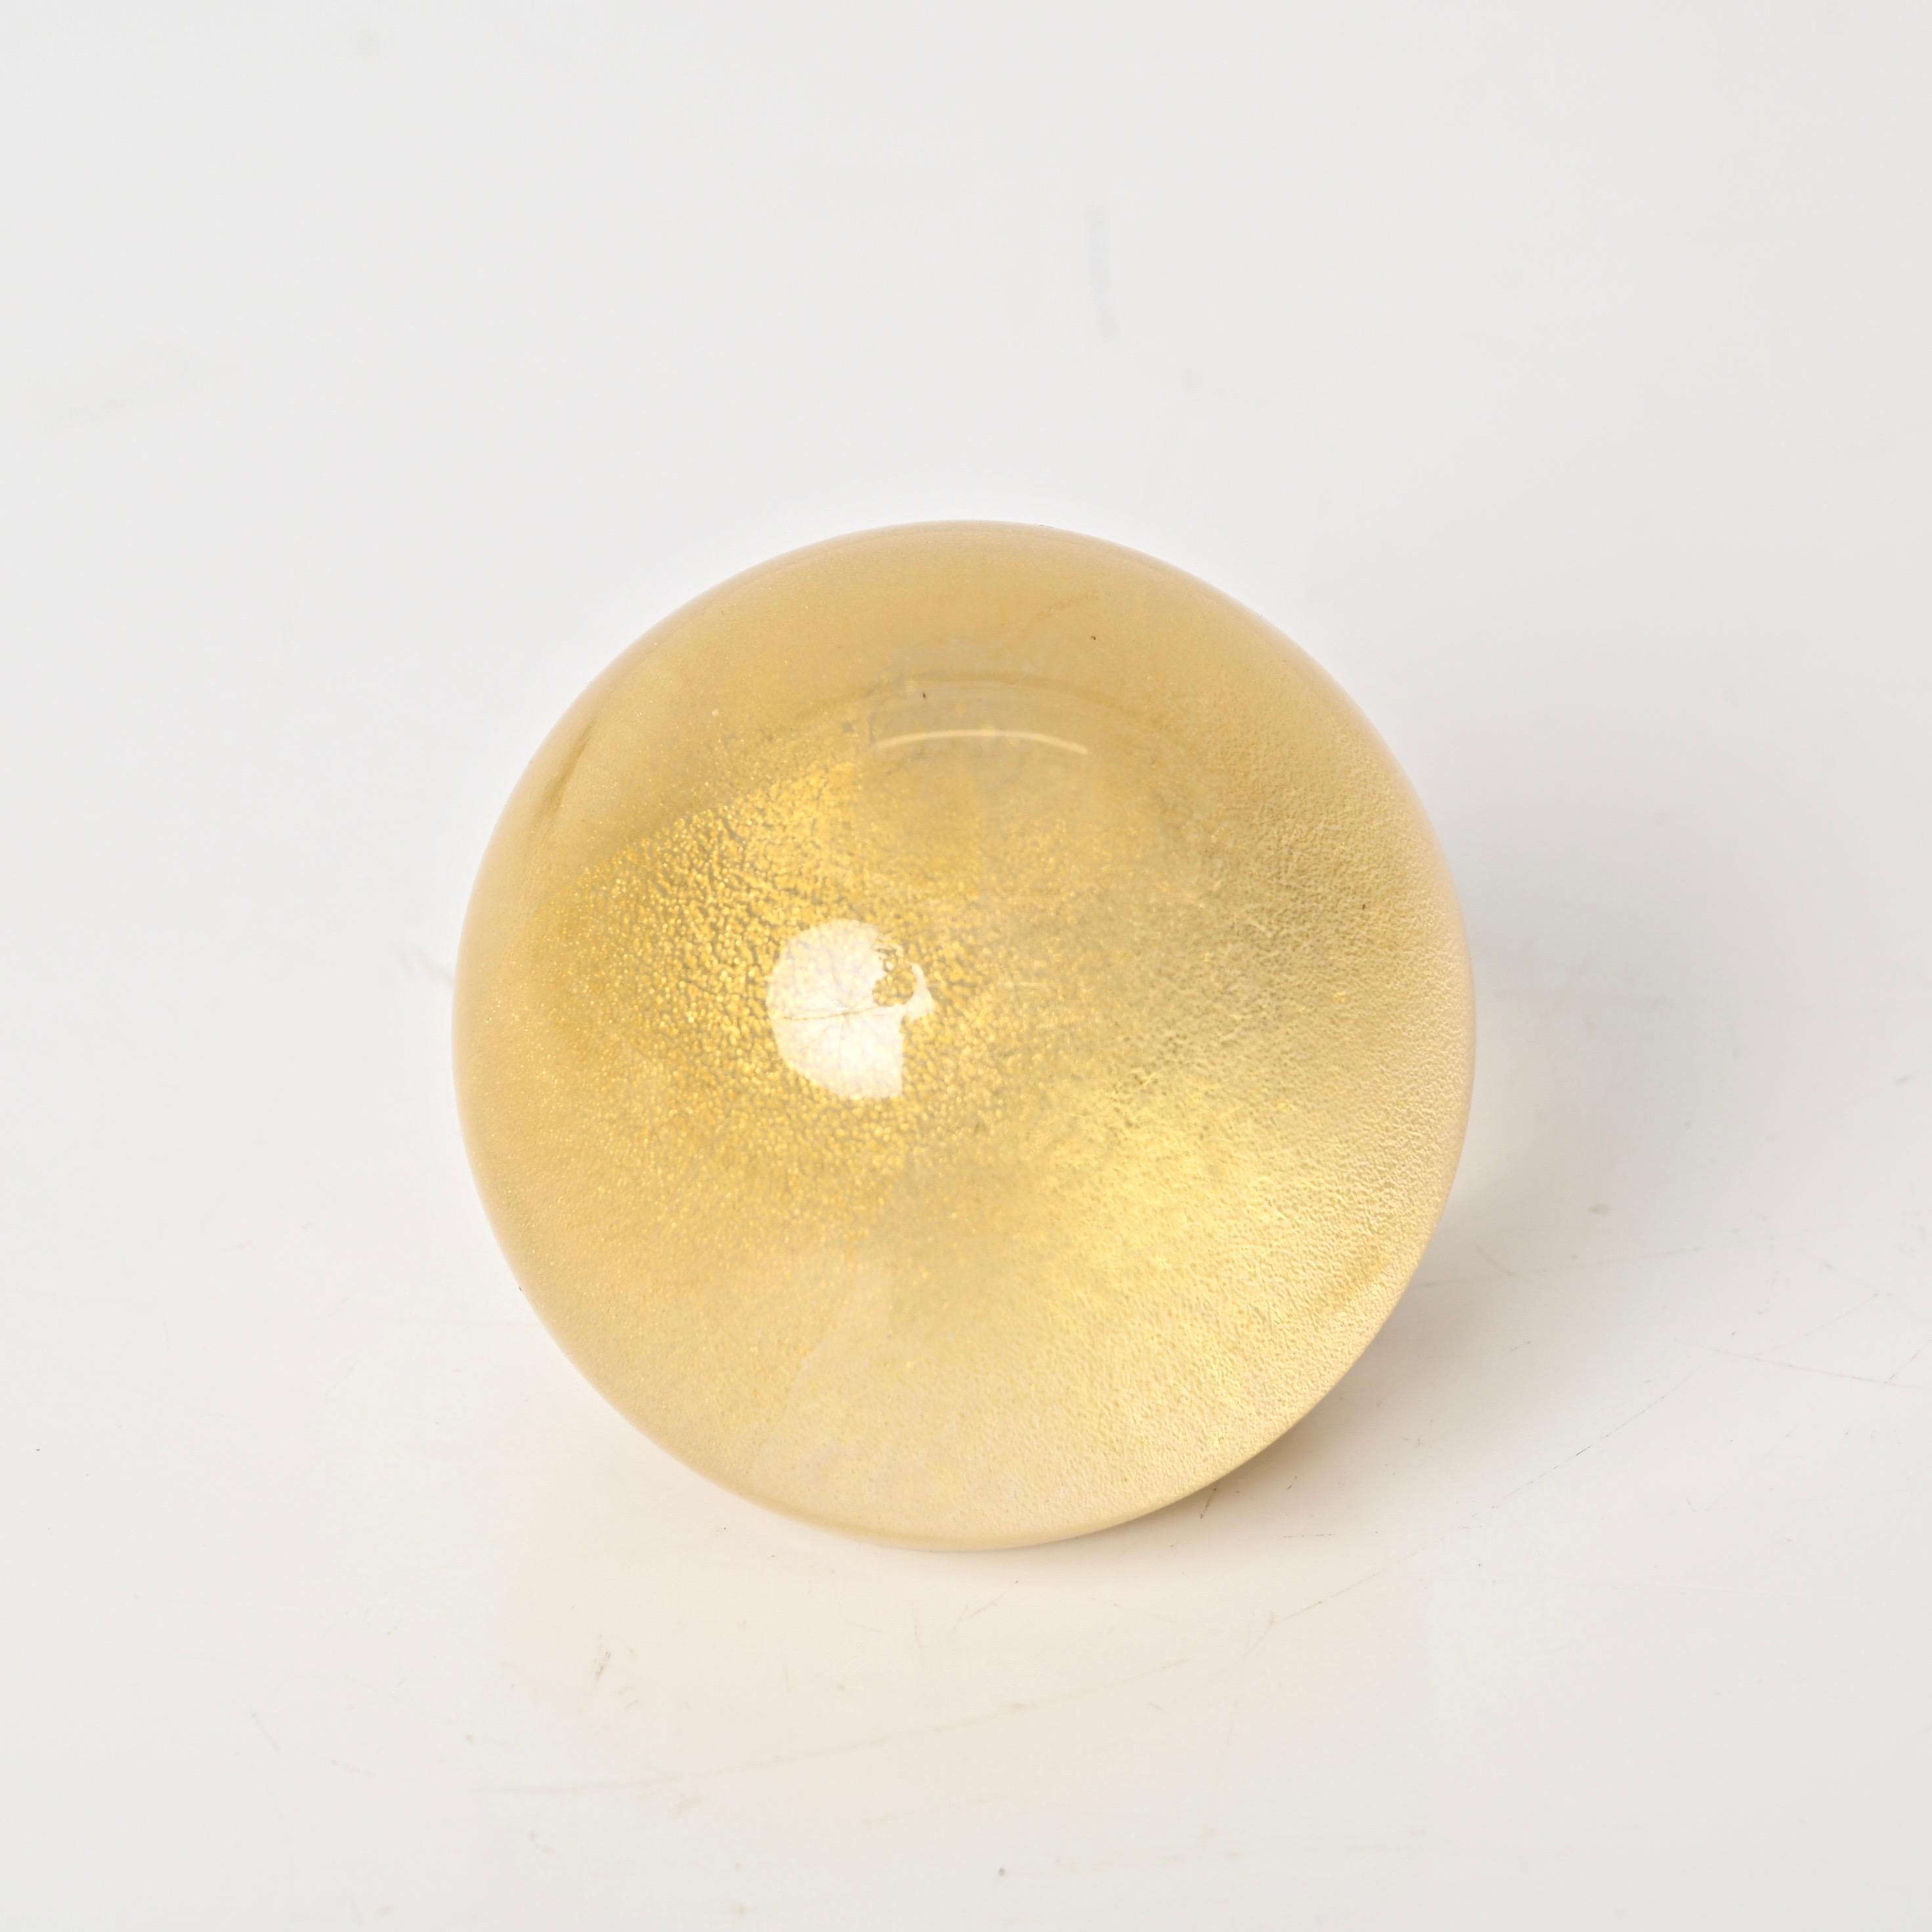 Late 20th Century Seguso Spherical Paperweight in Murano Glass with Gold Dust, Italy 1950s For Sale